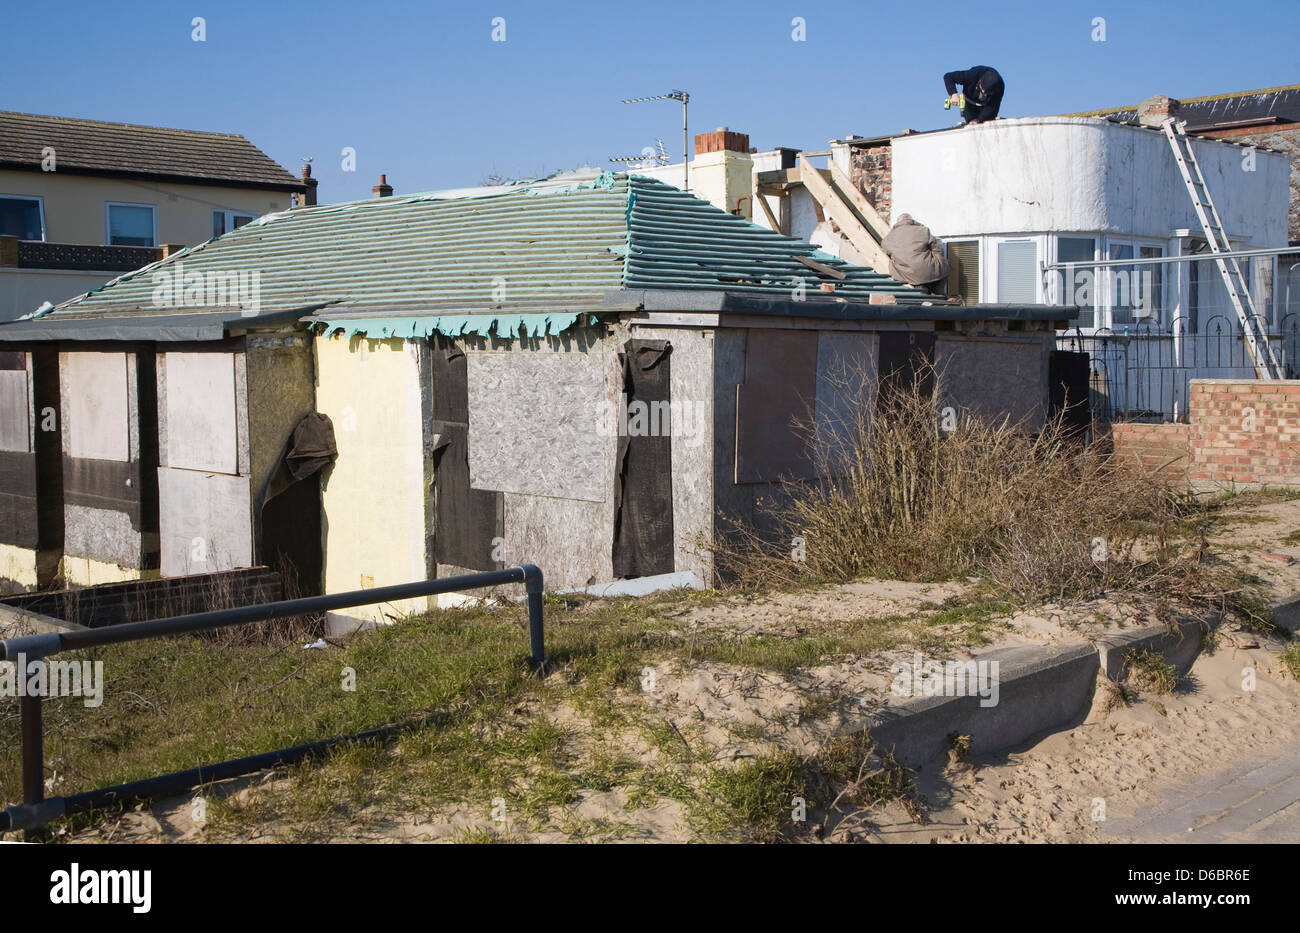 Building repairs taking place on housing, Jaywick, Essex, England Stock Photo